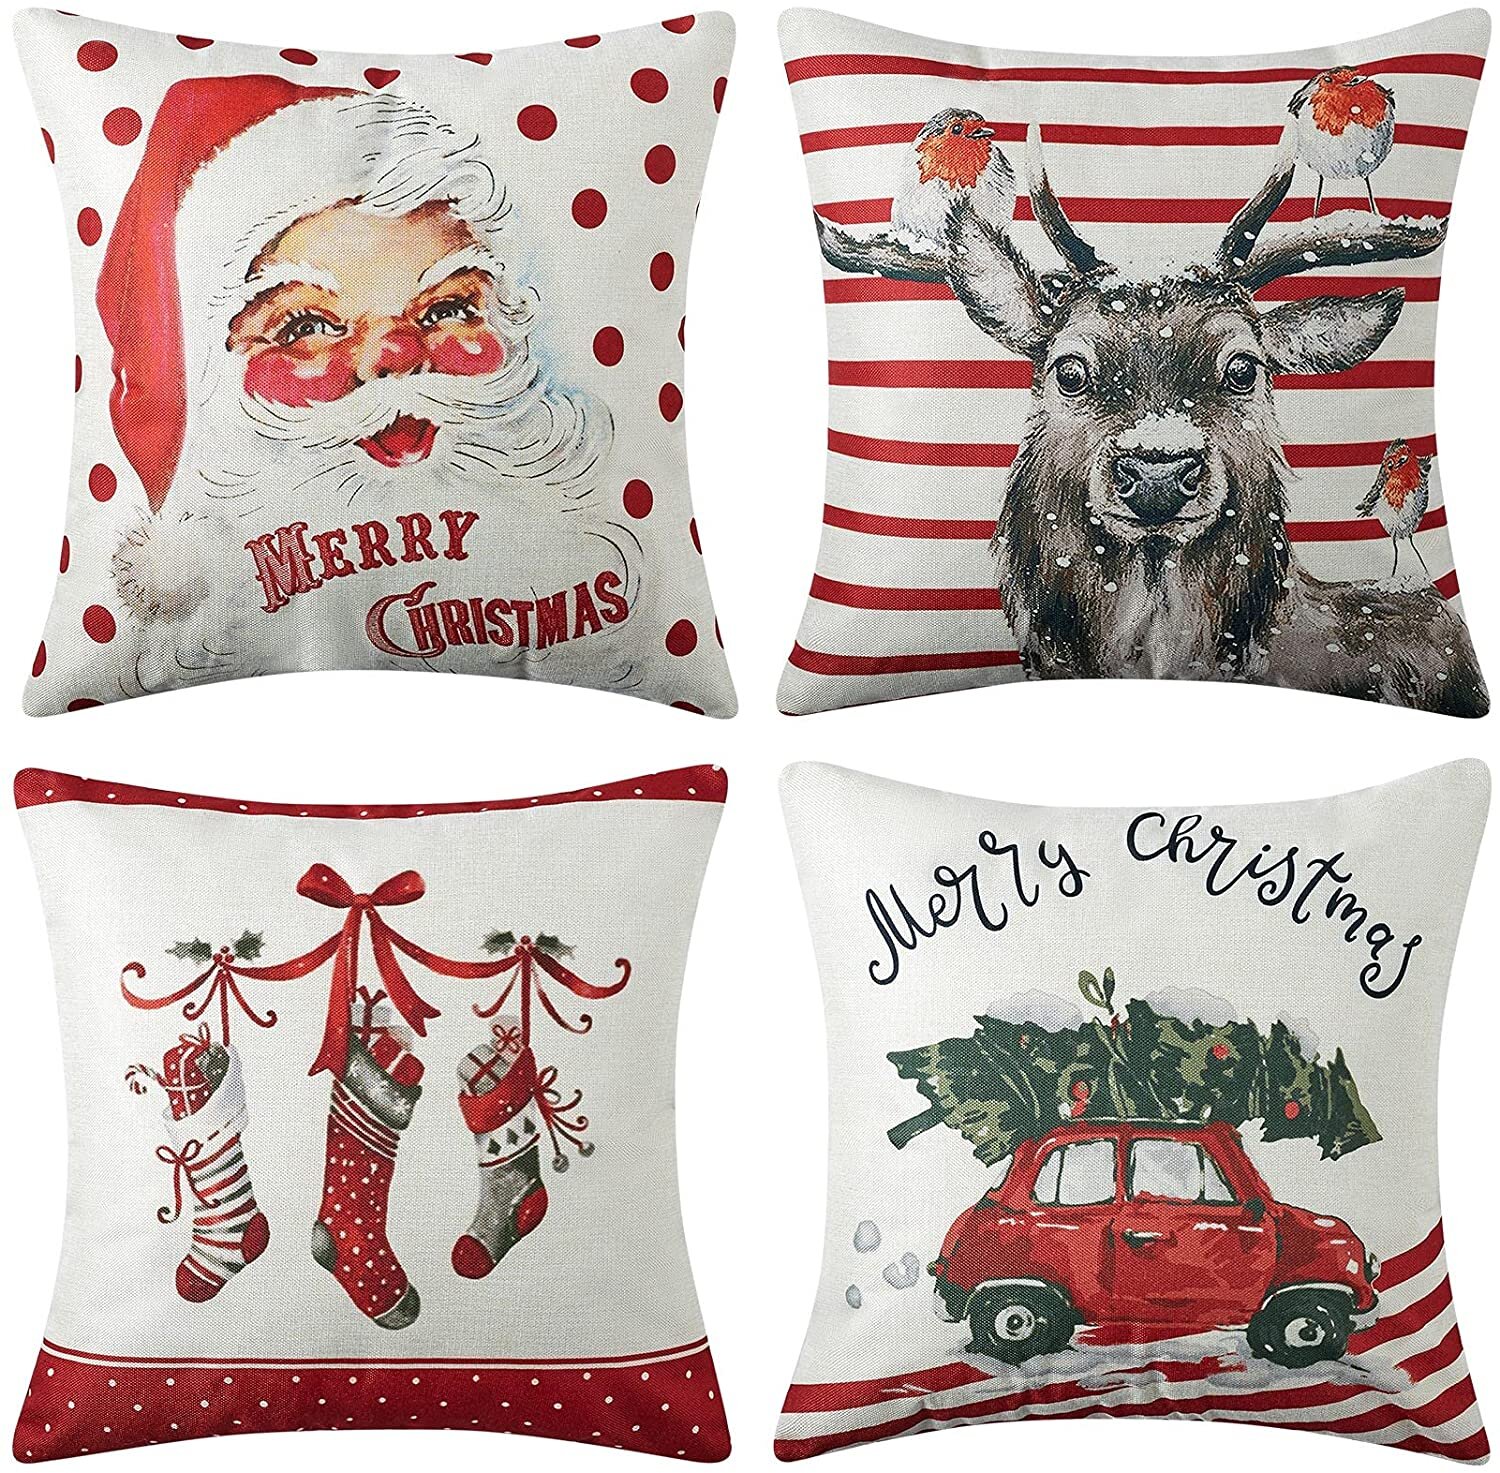 Christmas Throw Pillow Covers 18x18 Set of 4 Holiday Christmas Farmhouse Pillow Covers Sofa Christmas Pillows Decorative Snowman Winter Pillowcase Christmas Decorations for The Home Couch Decor 